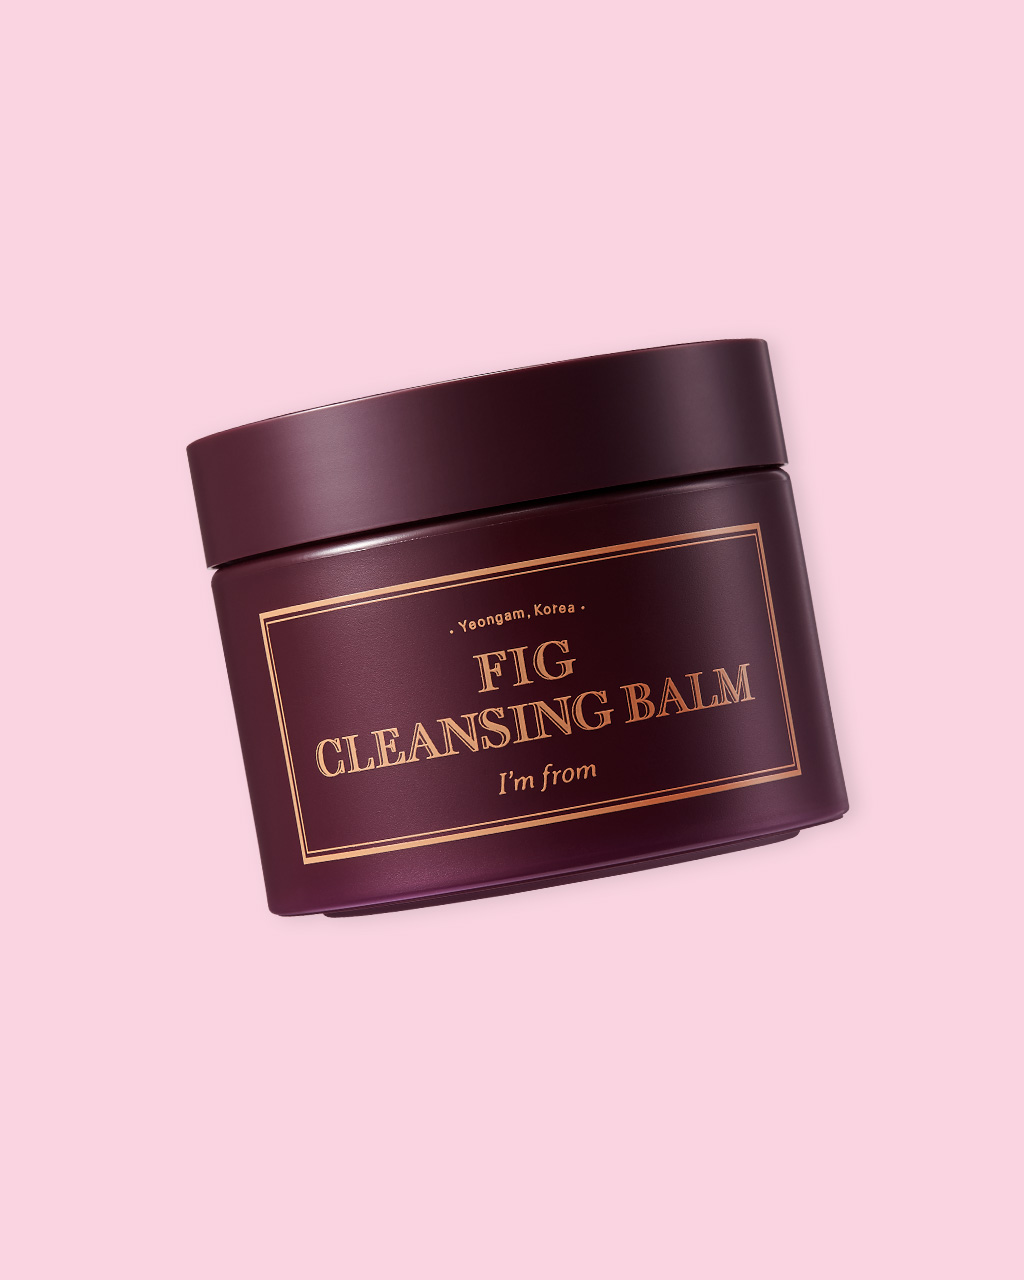 Im-From-Fig-Cleansing-Balm-skin-care-korean (2)